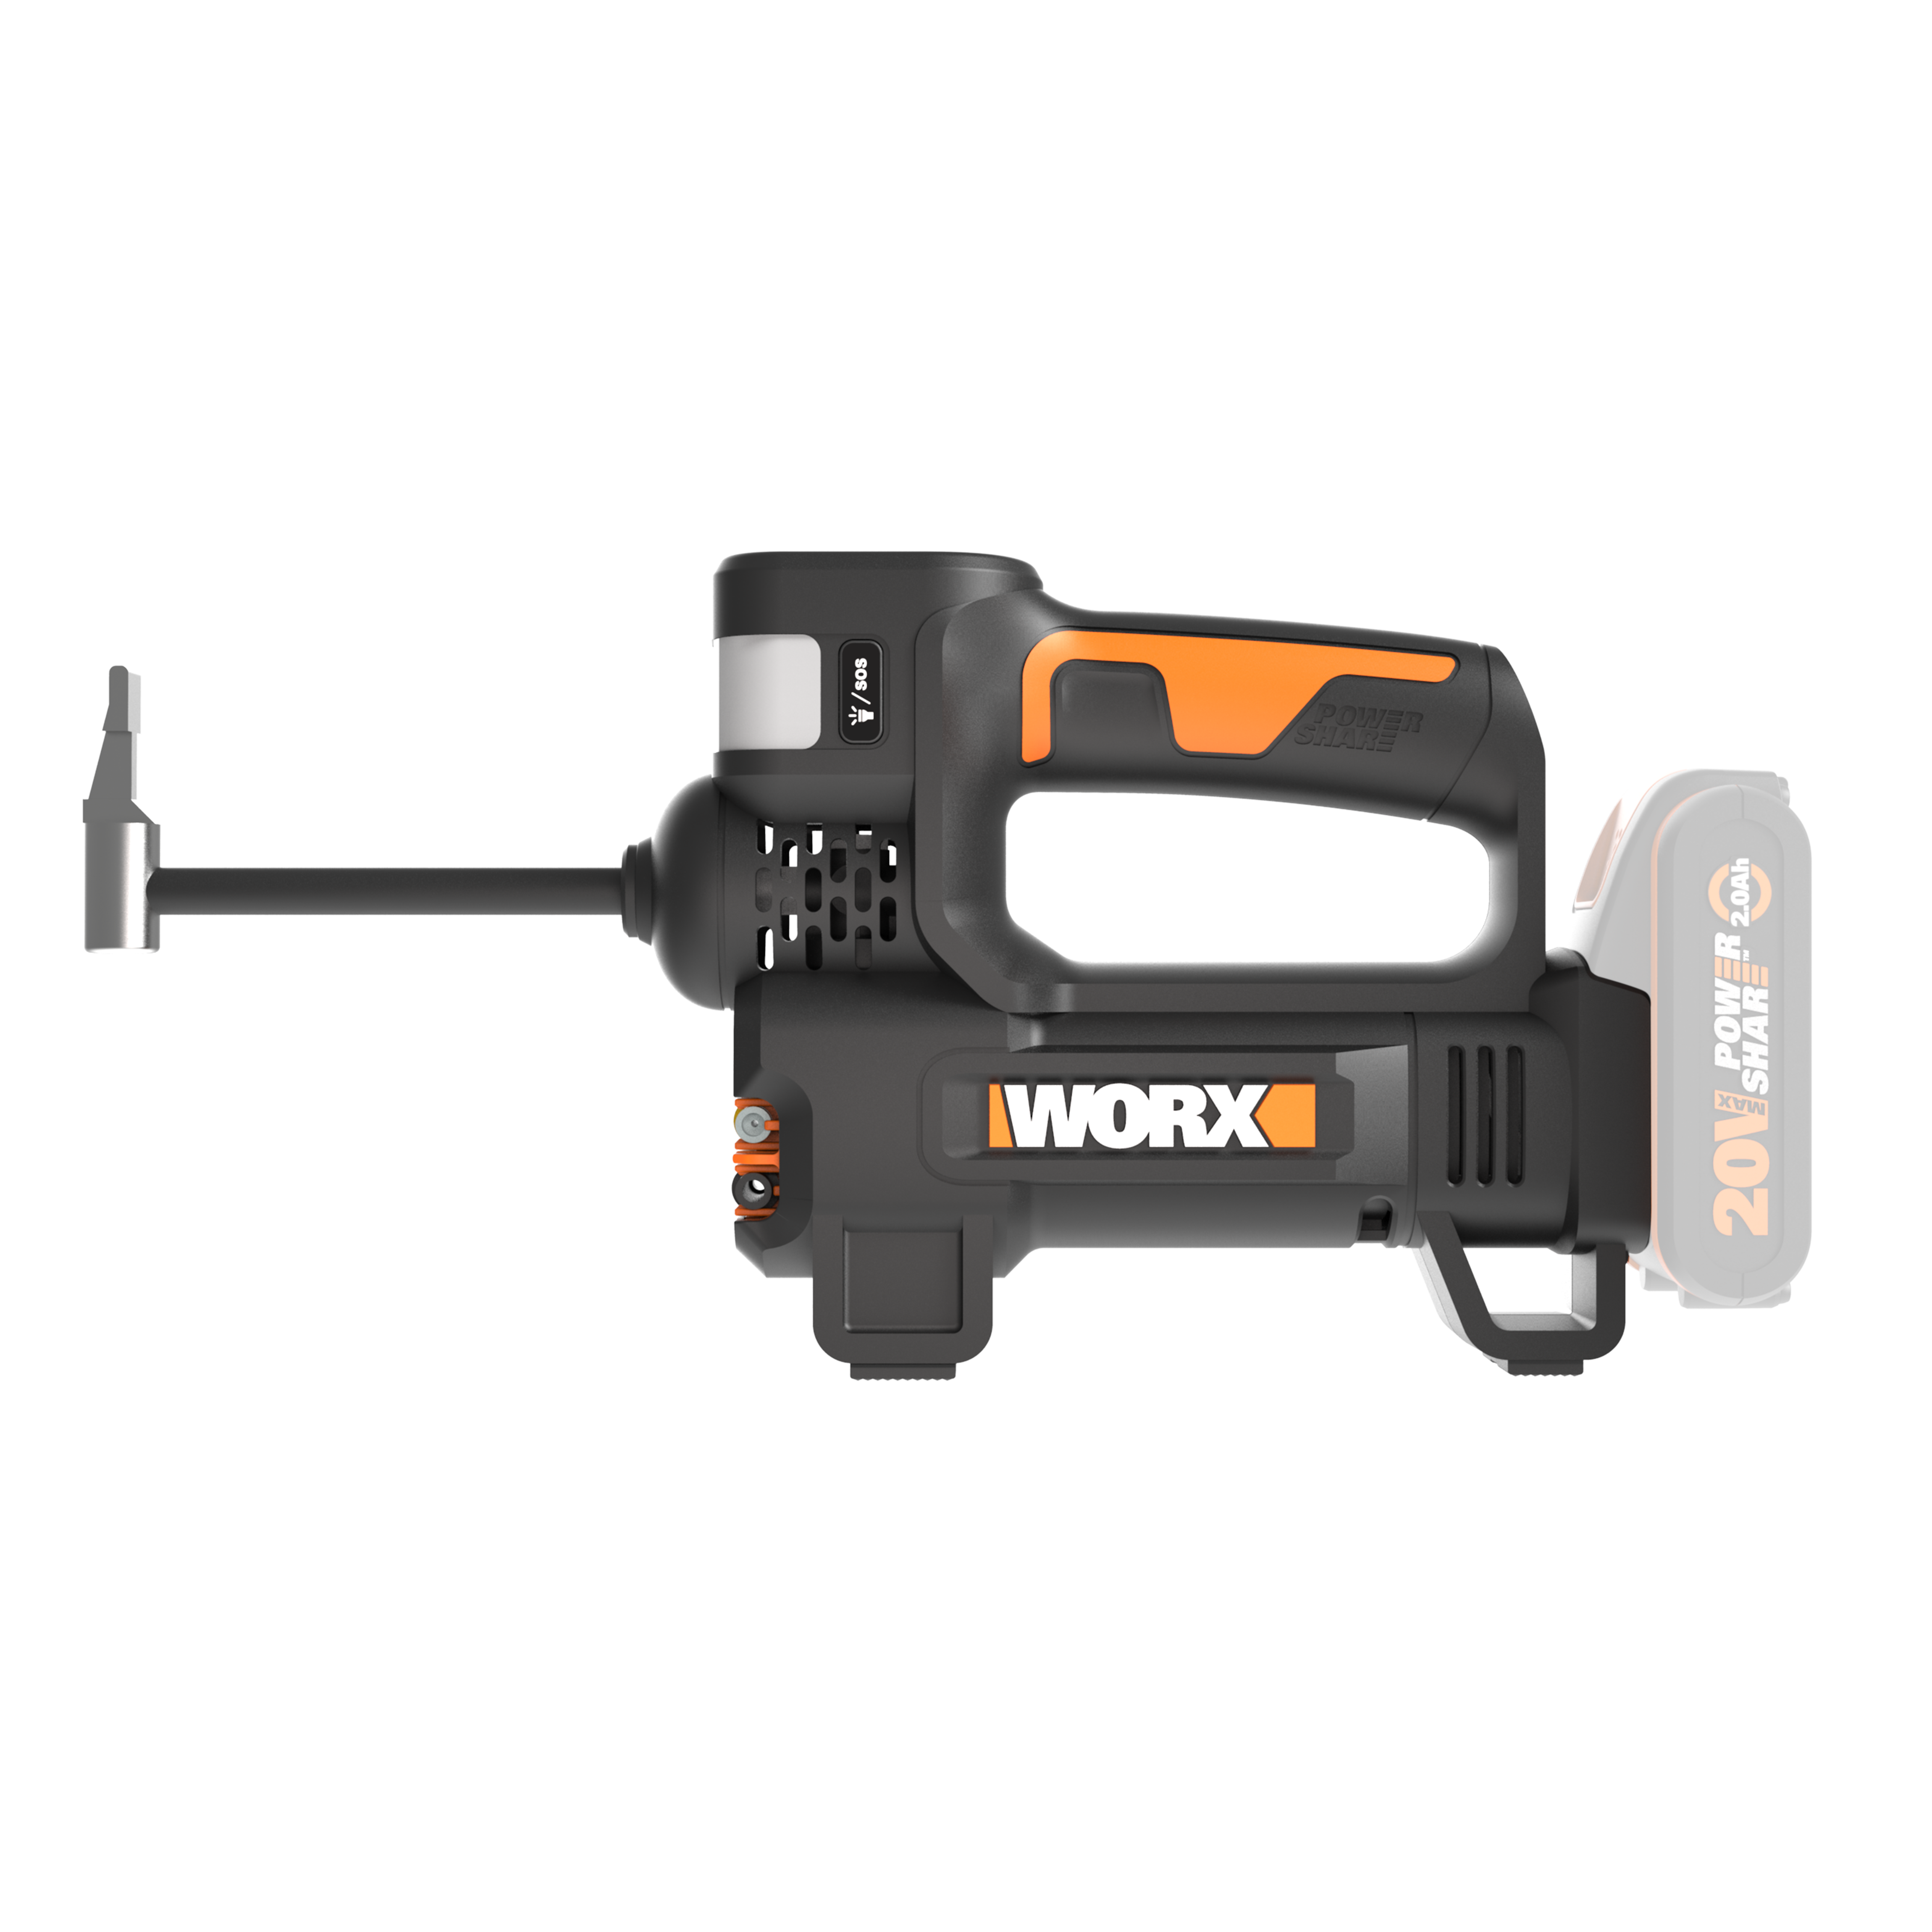 WORX Power Share 20-volt / 20 Lithium Ion (li-ion) Air Inflator (Power  Source: Battery) in the Air Inflators department at